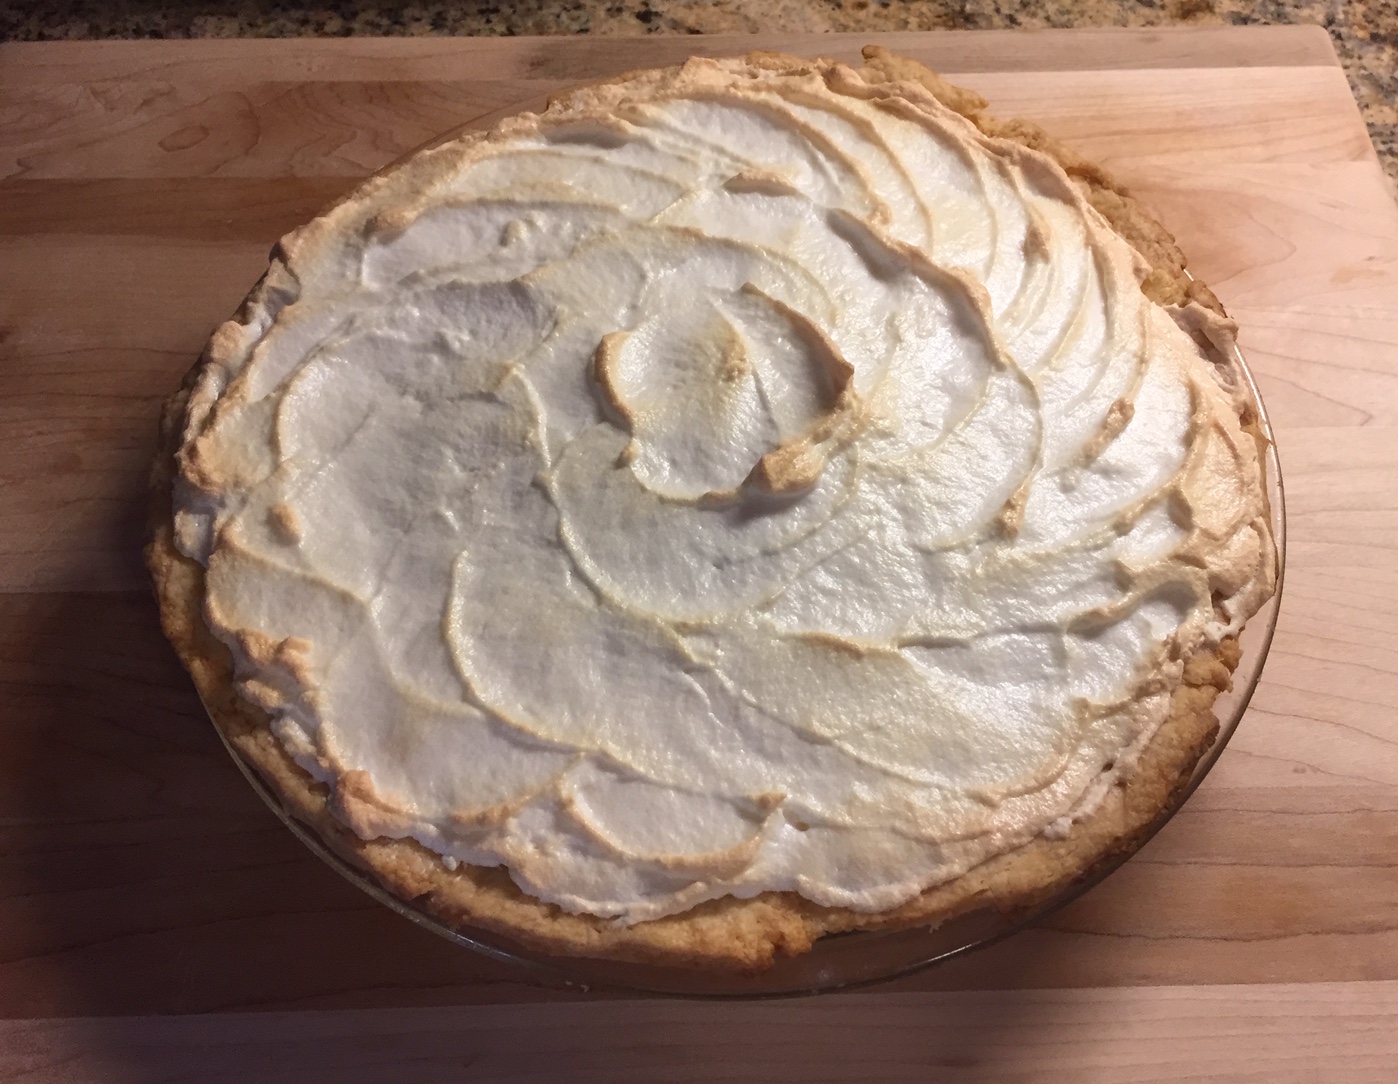 A pie with a meringue crust on a counter.